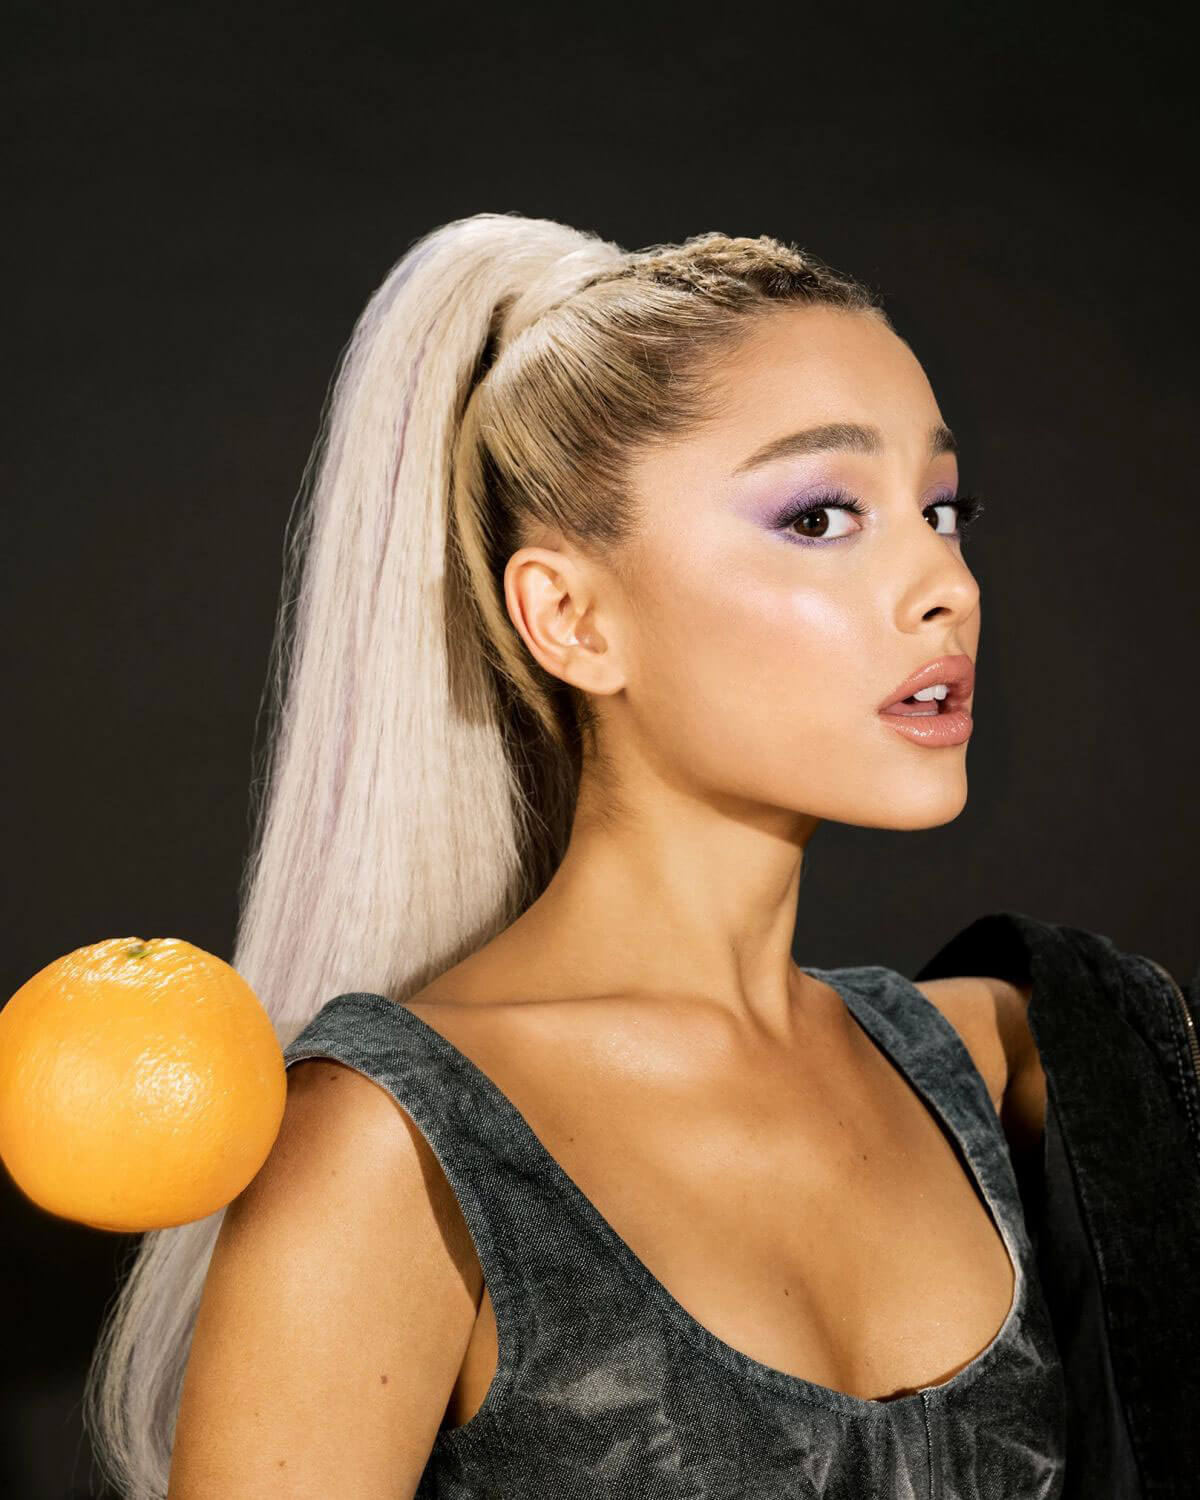 Ariana Grande in The Fader, Summer 2018 Issue